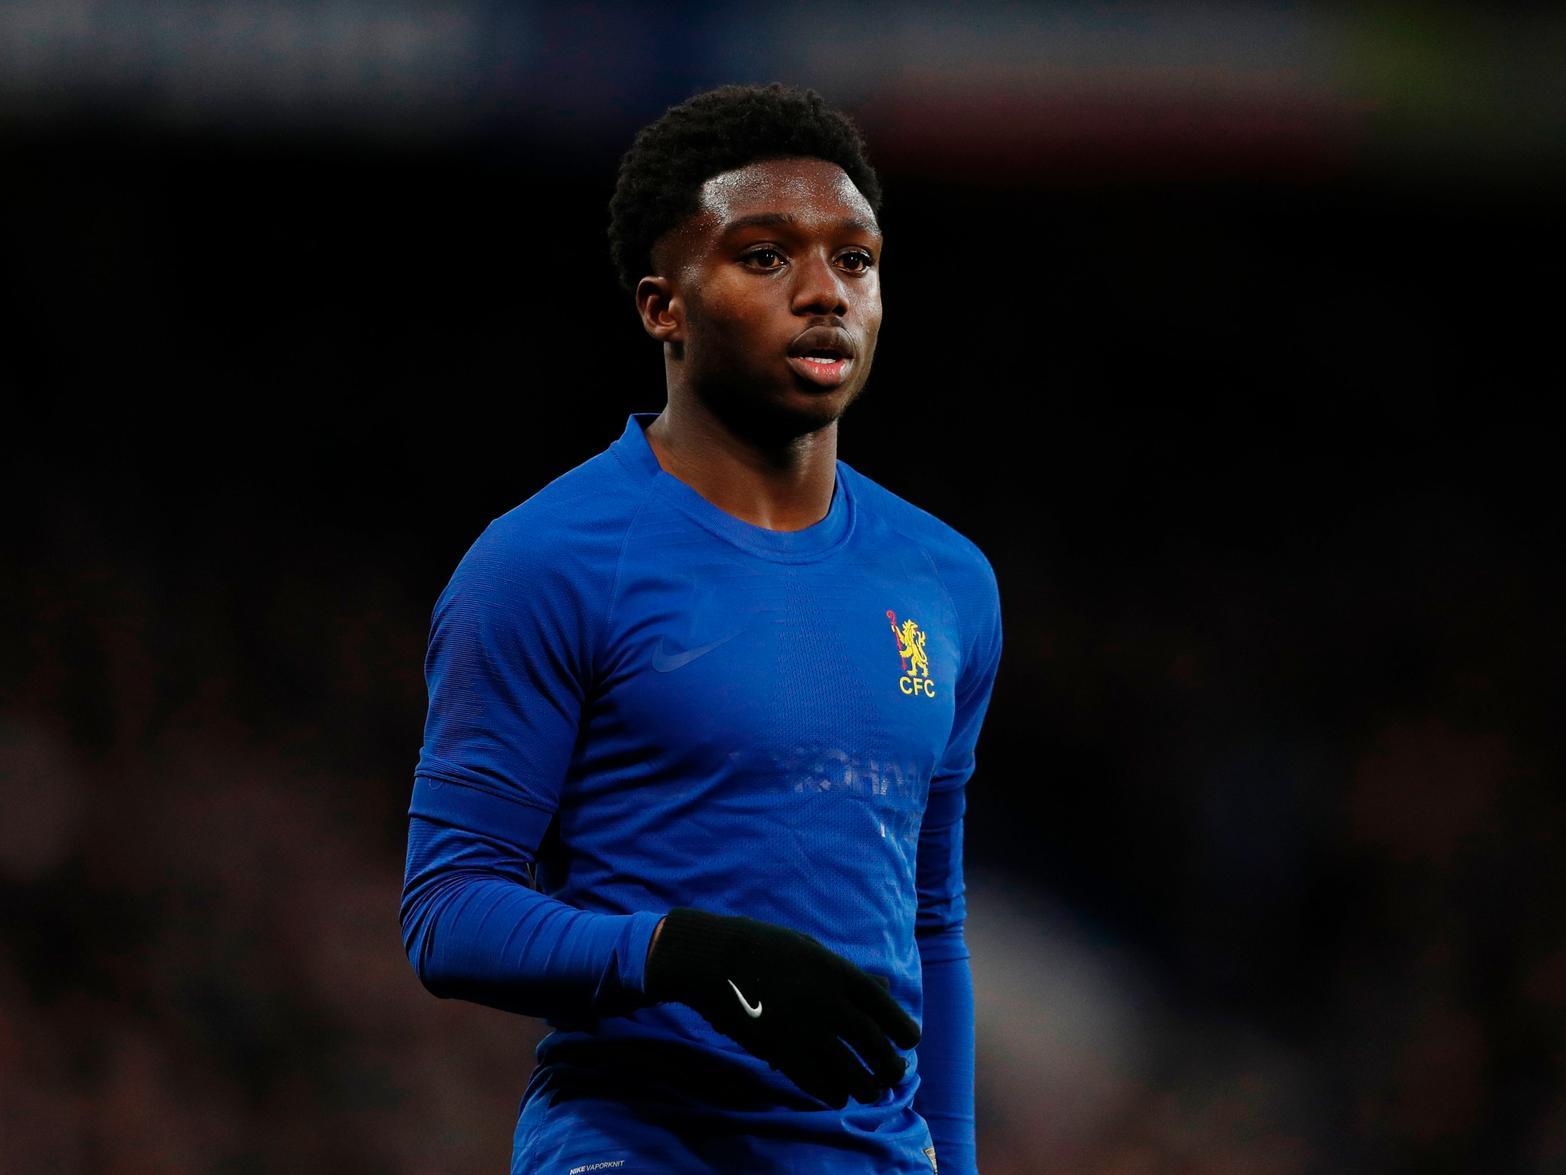 A move for Tariq Lamptey was snatched out of Blackburn Rovers' hands, however a contract wrangle between Lamptey and Chelsea enabled Brighton to creep in and land 19-year-old. (Lancs Live)